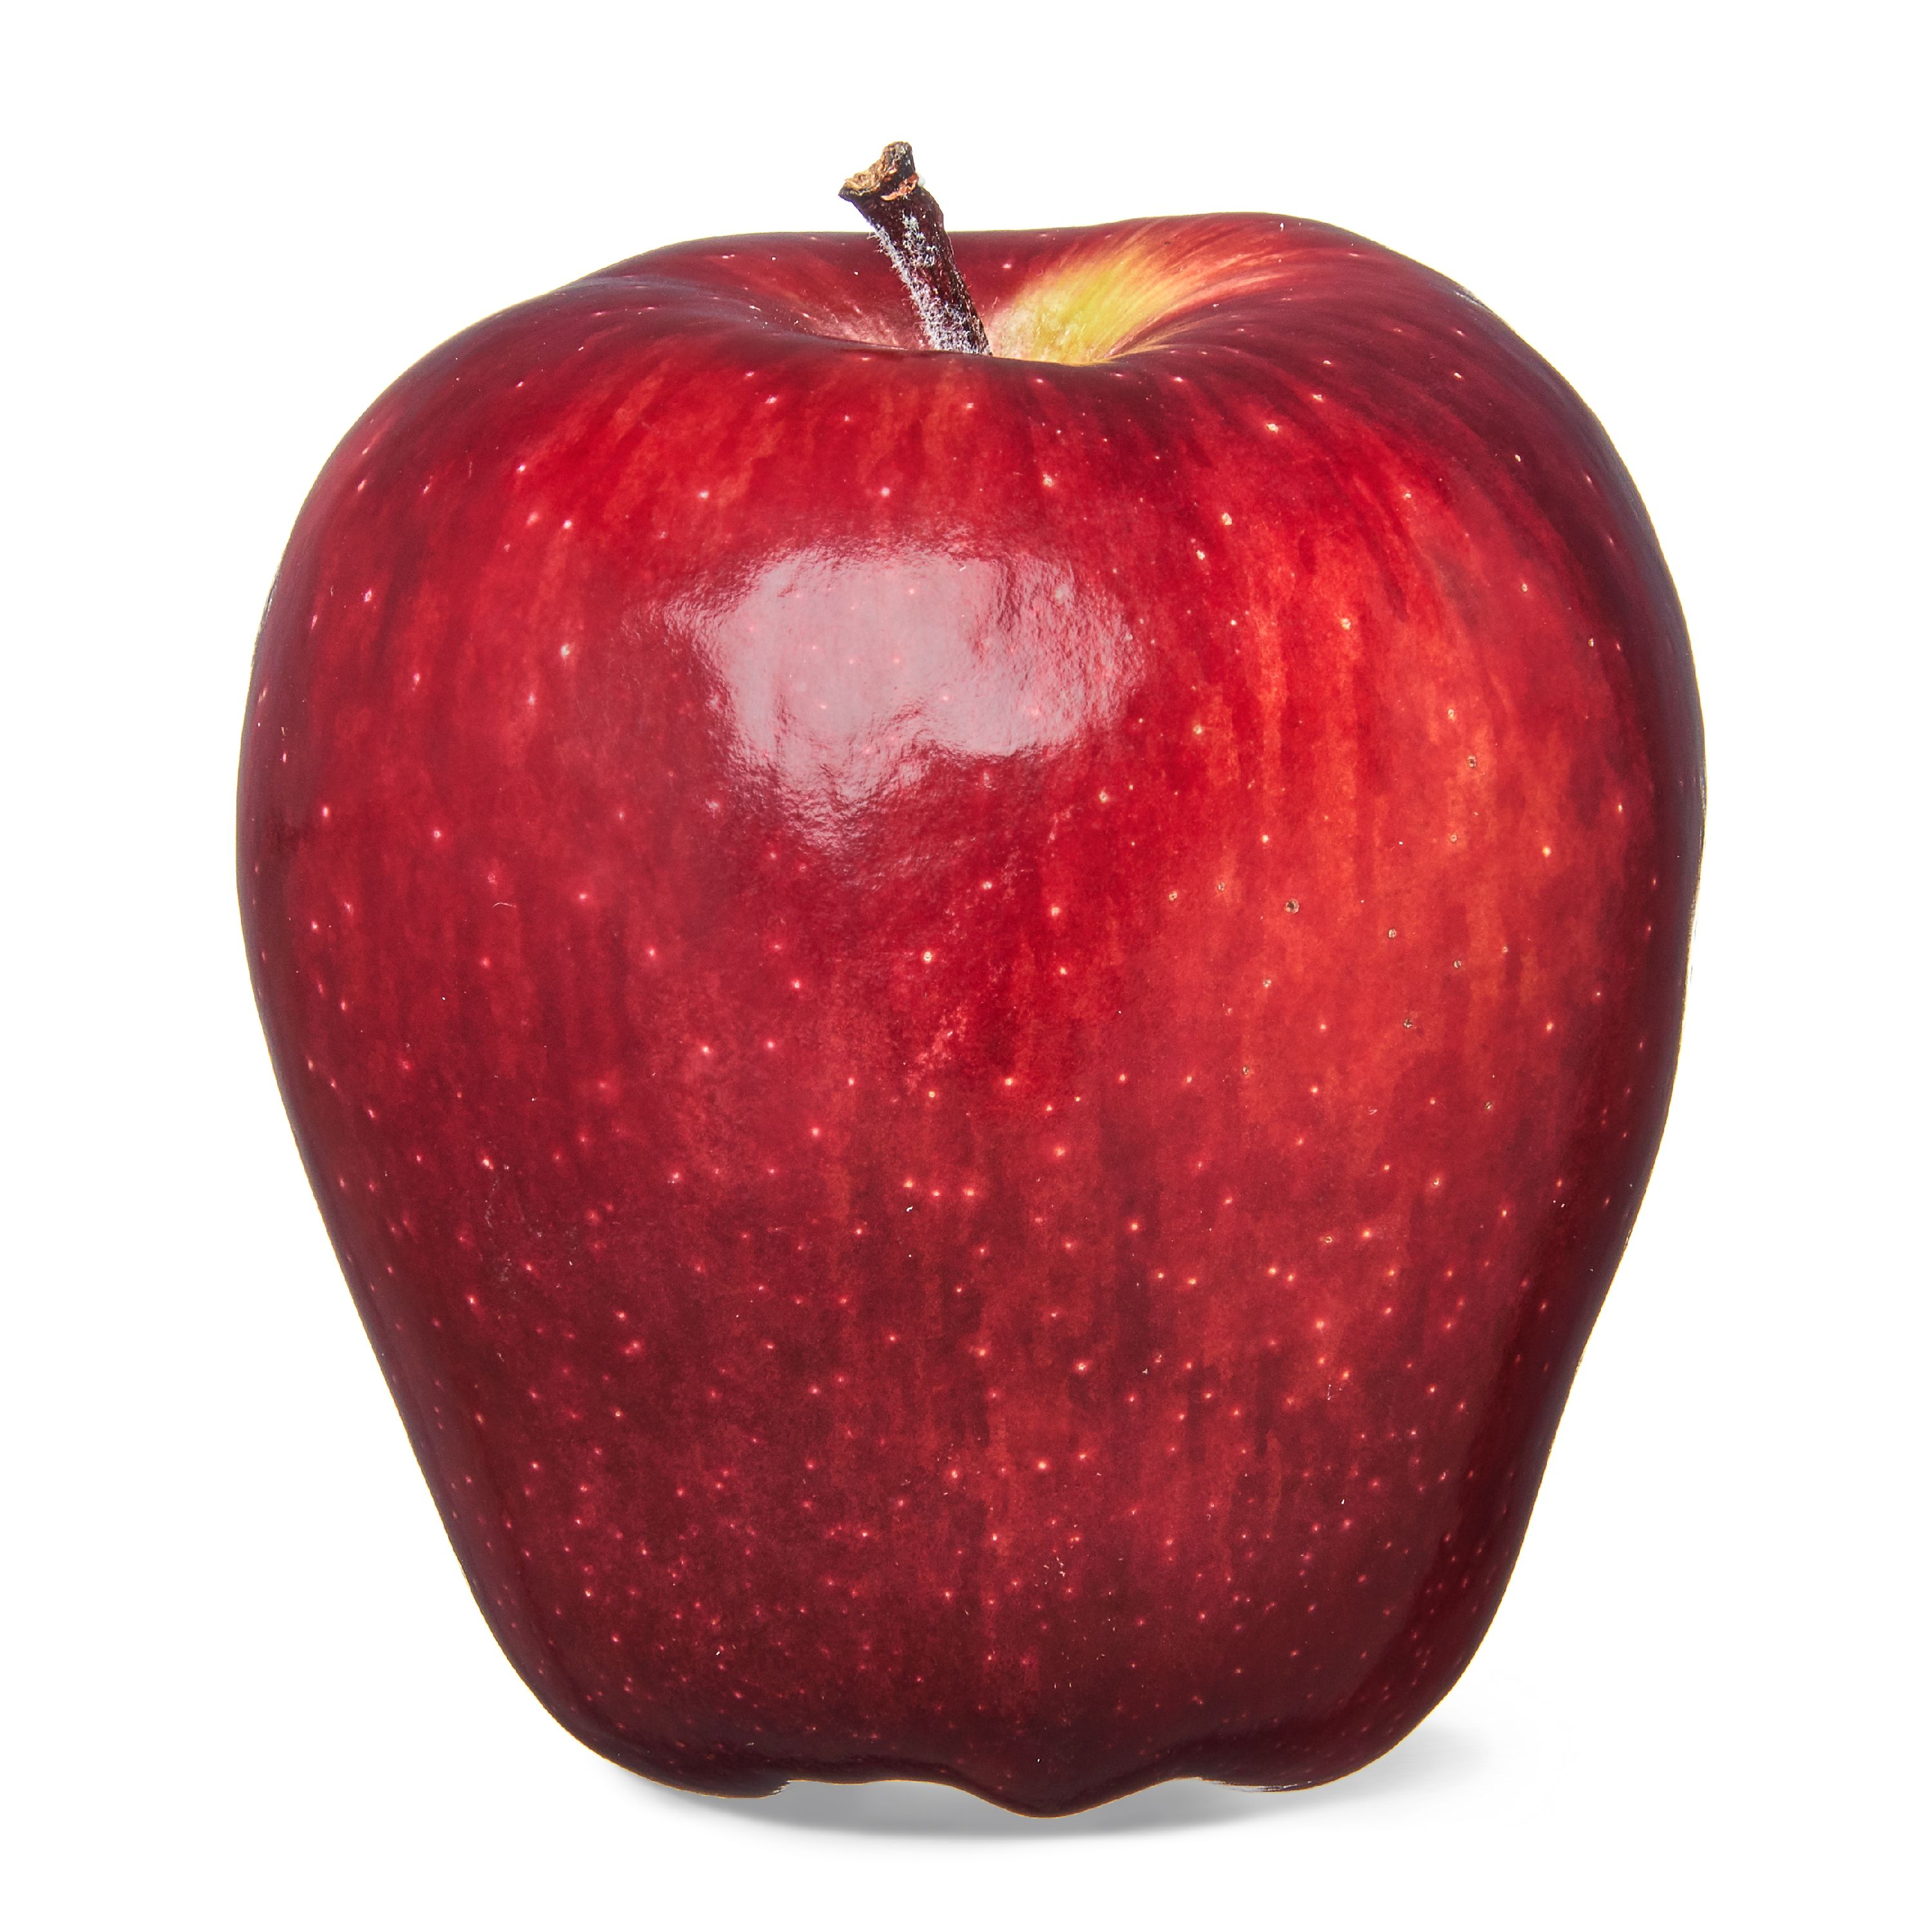 Fresh Red Delicious Apple, Each - image 1 of 7